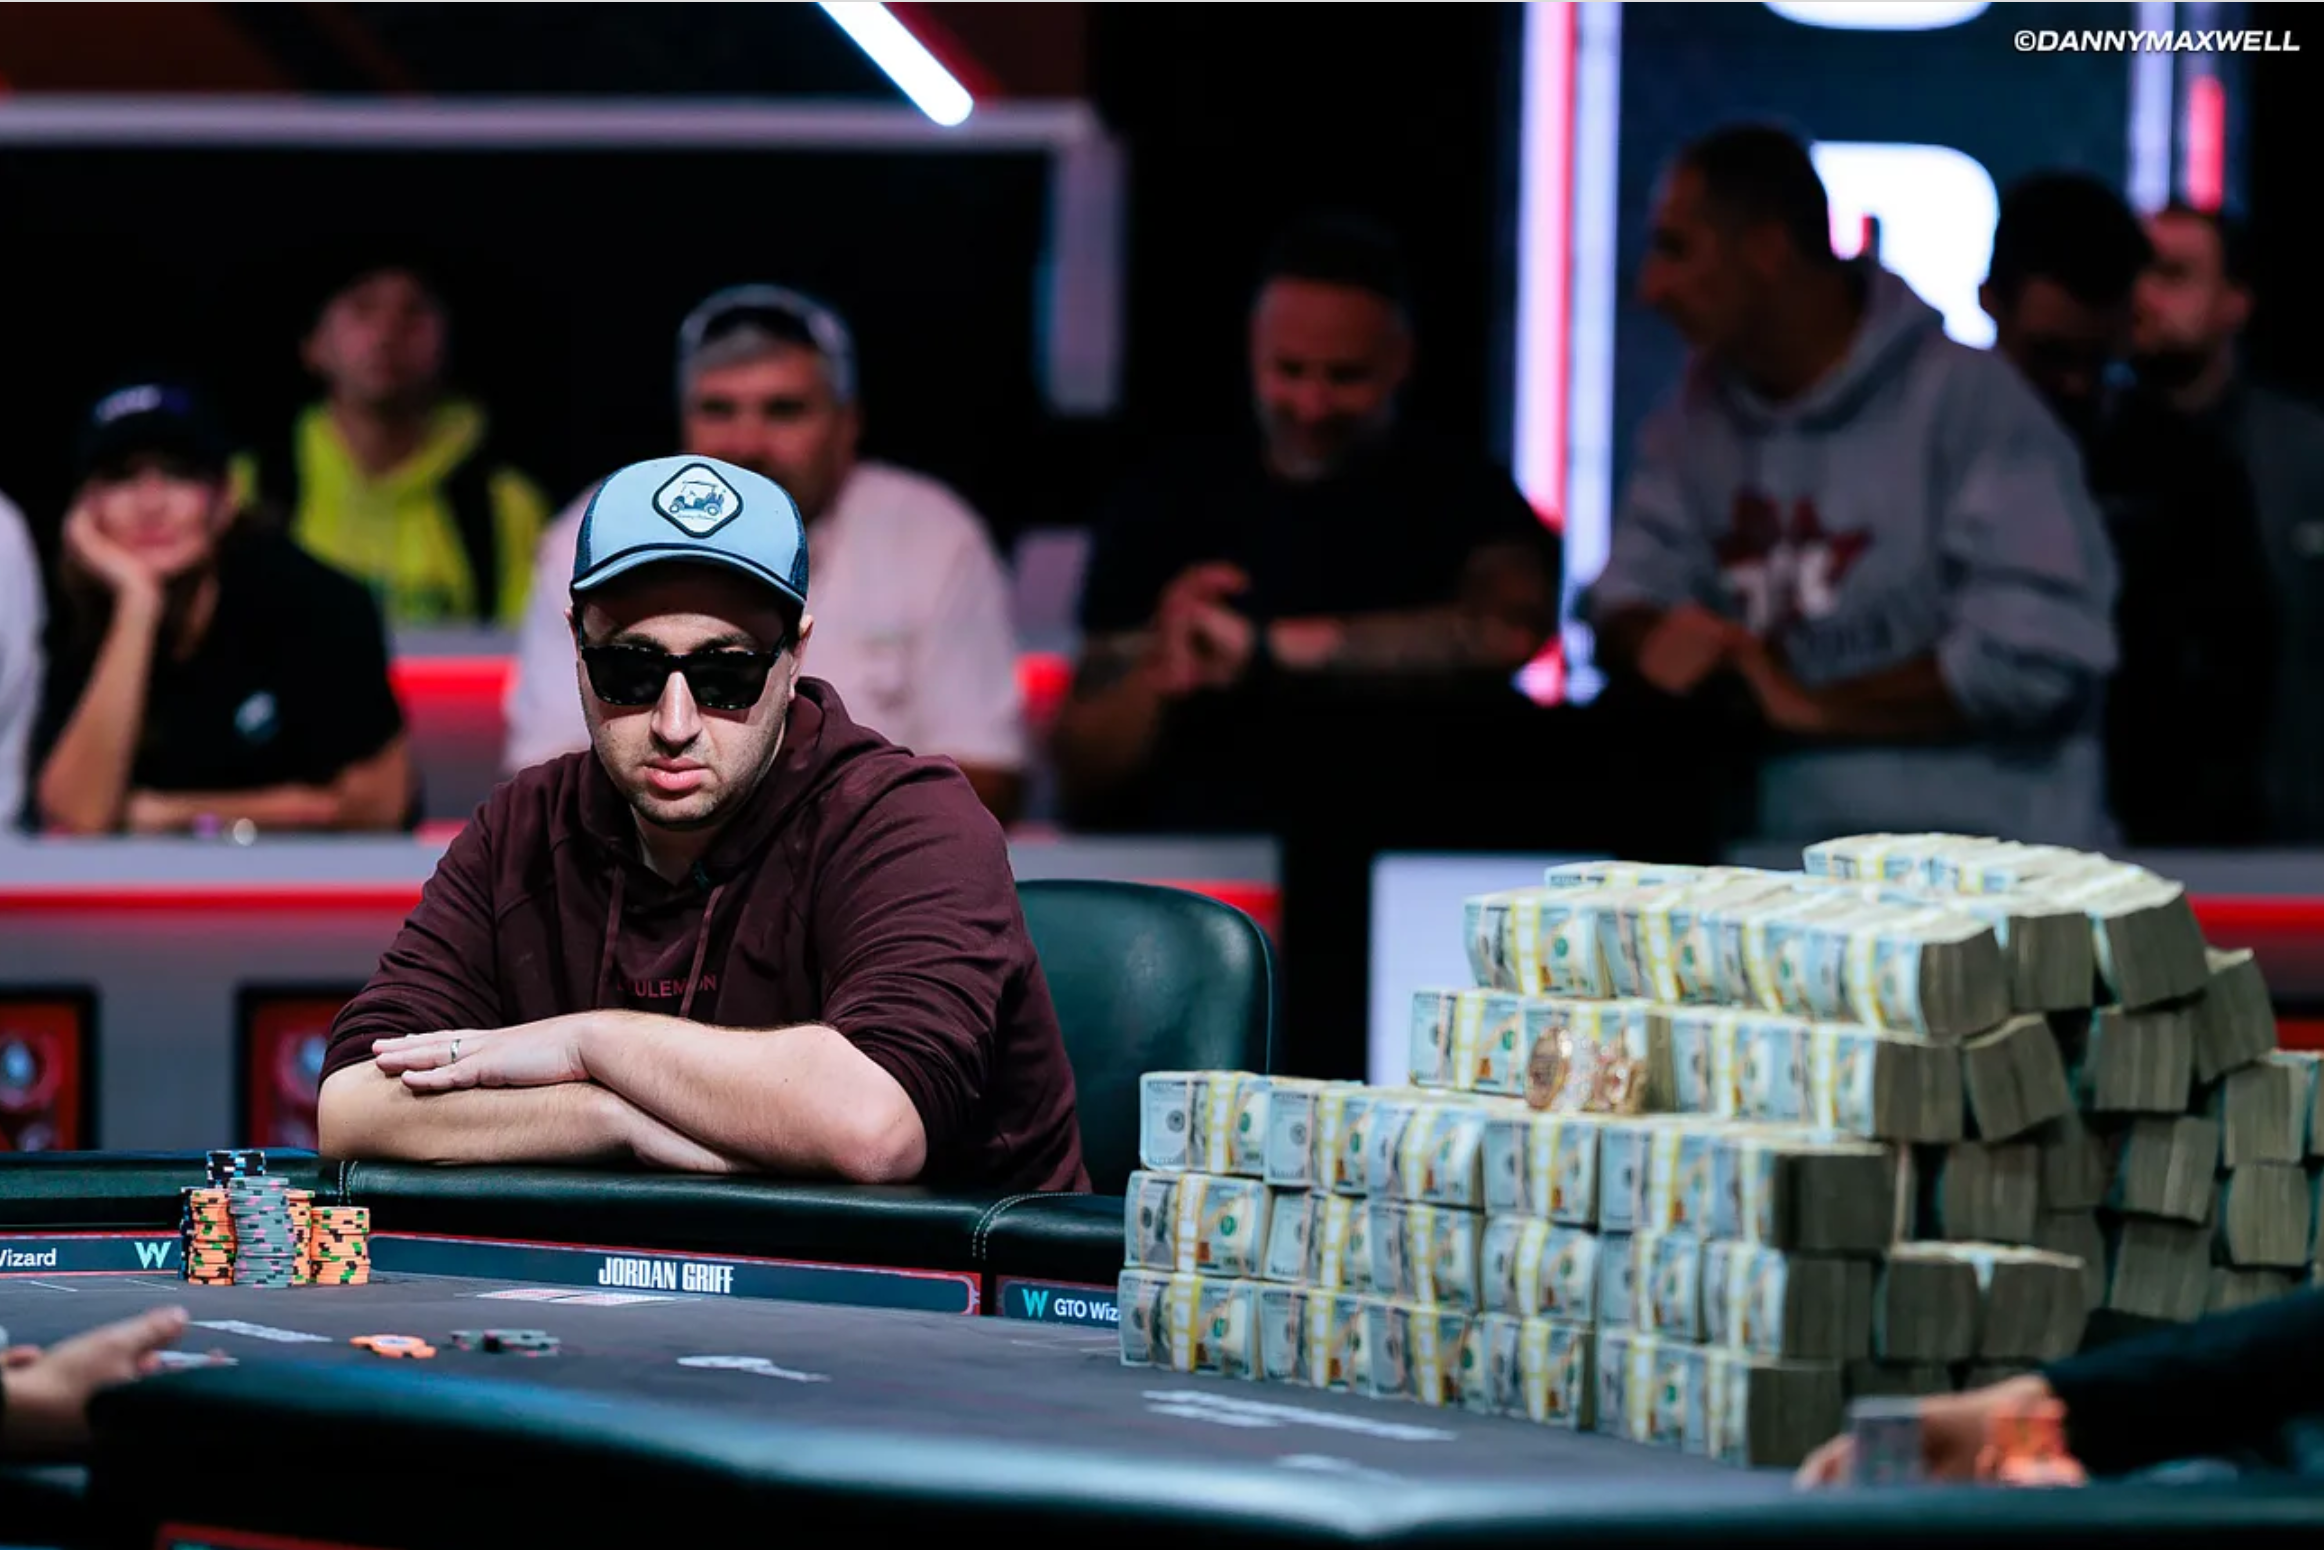 Illinois poker player earns $6 million with finish at World Series of Poker Main Event